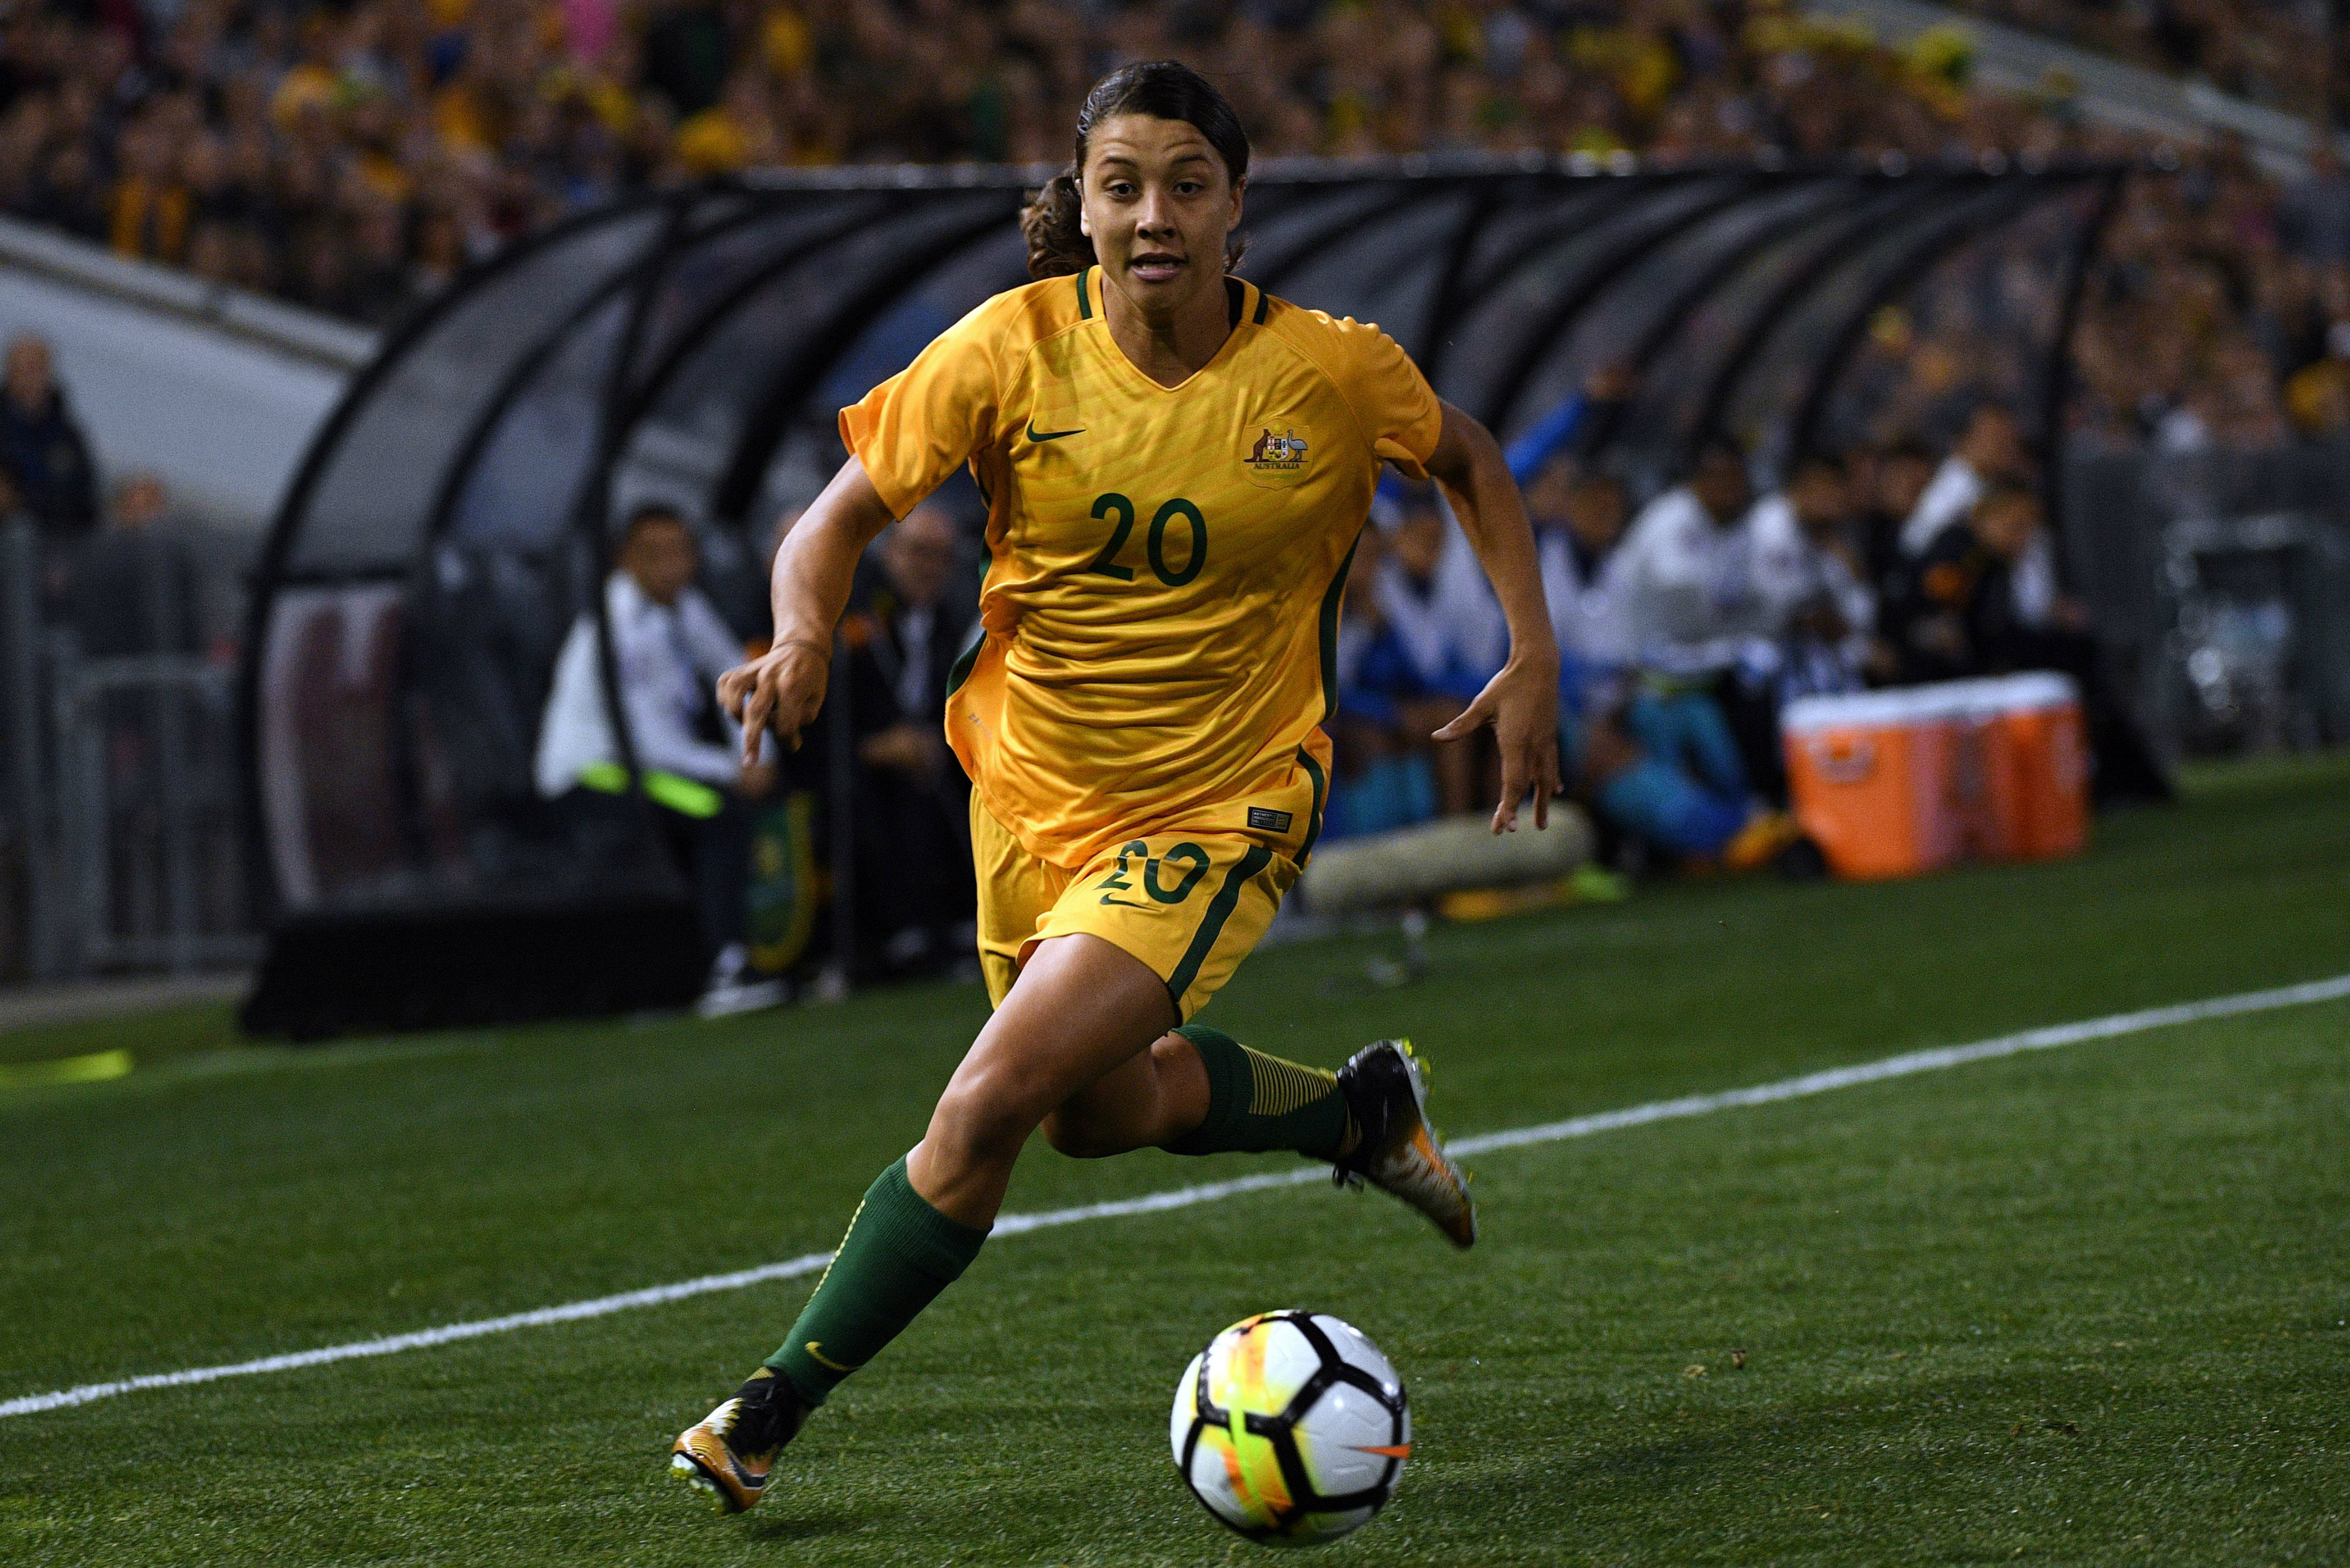 Sam Kerr, Steph Catley nominated for NWSL awards | MyFootball